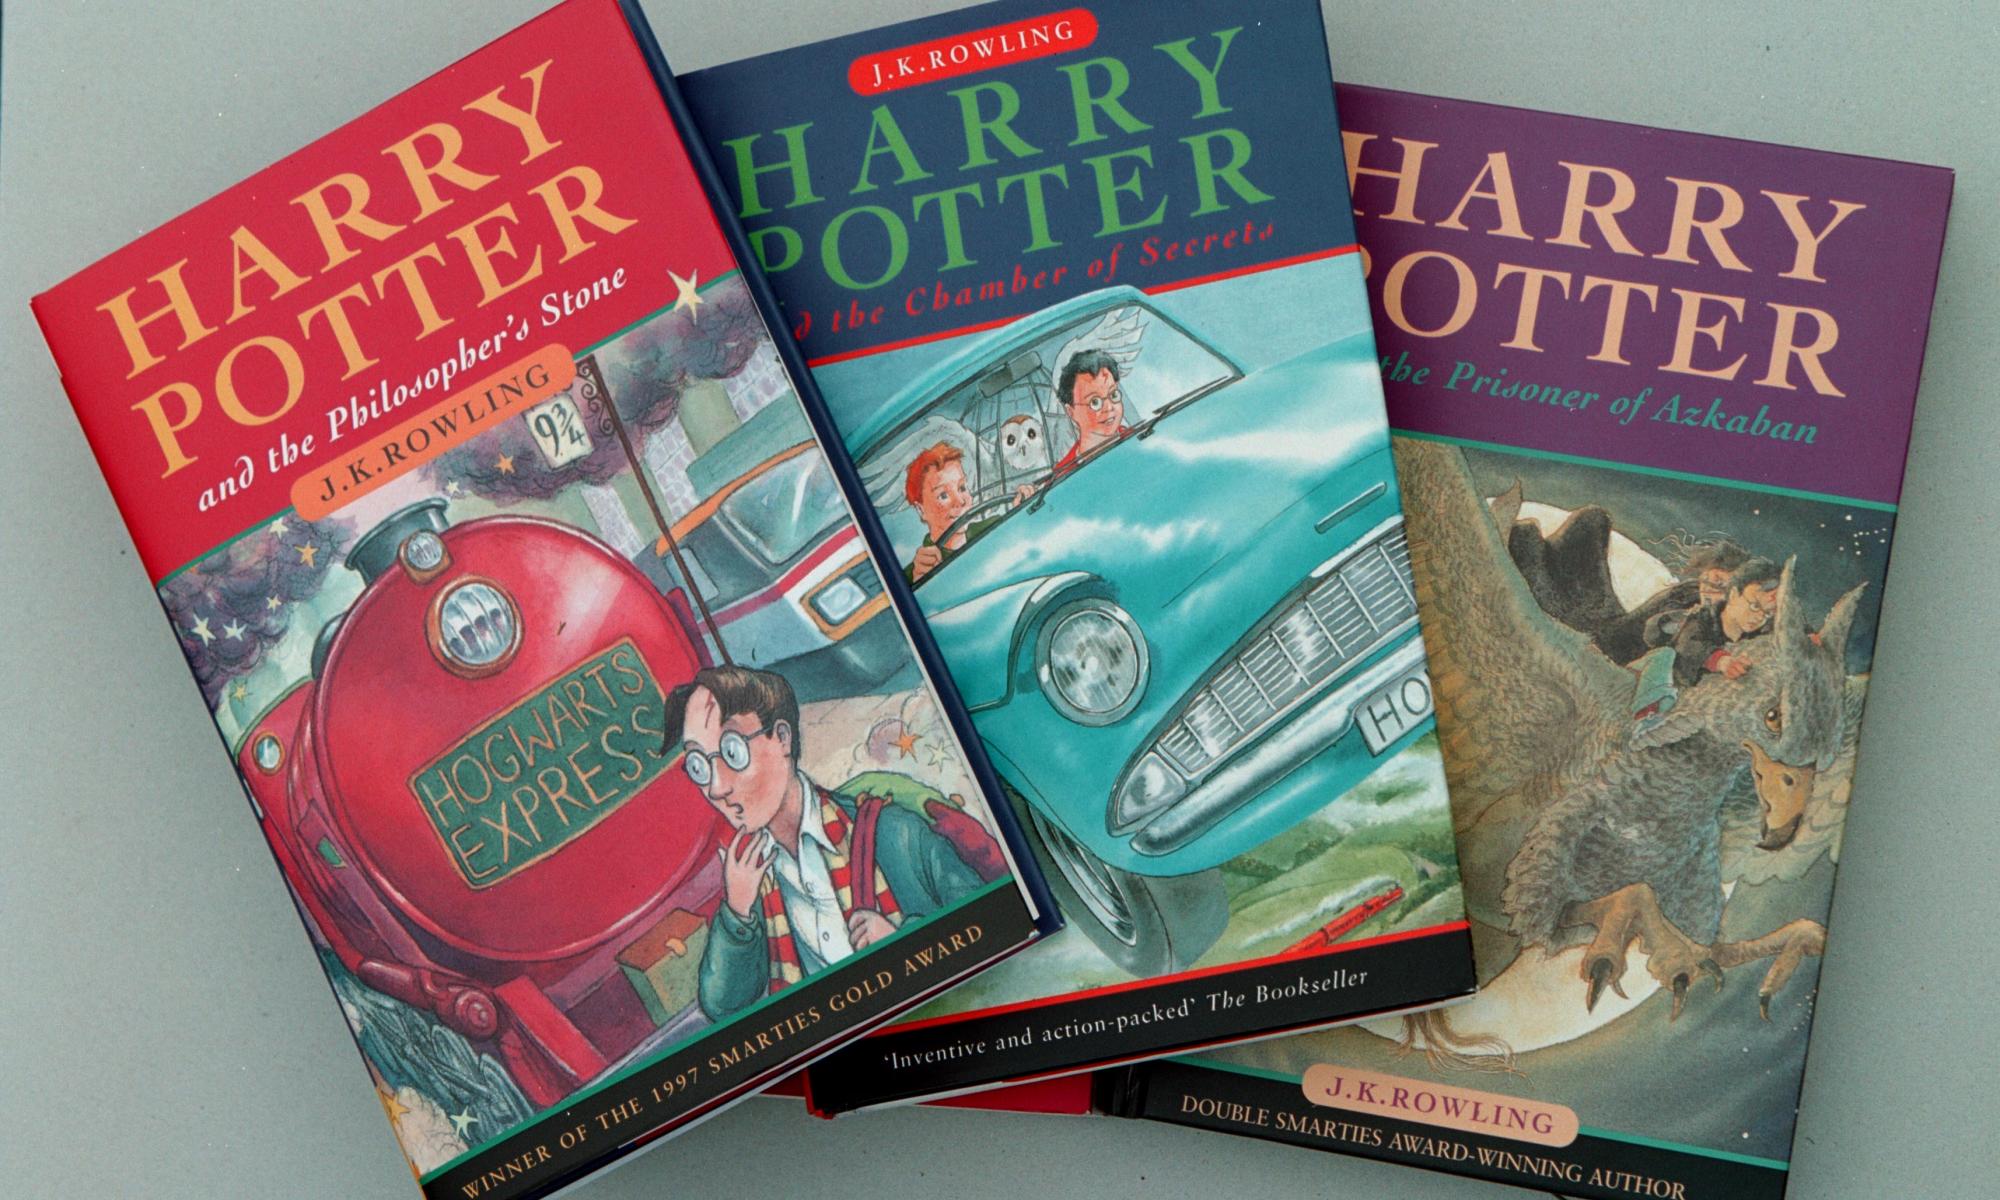 amazon, audible to turn all seven of jk rowling’s harry potter books into full-cast audiobooks